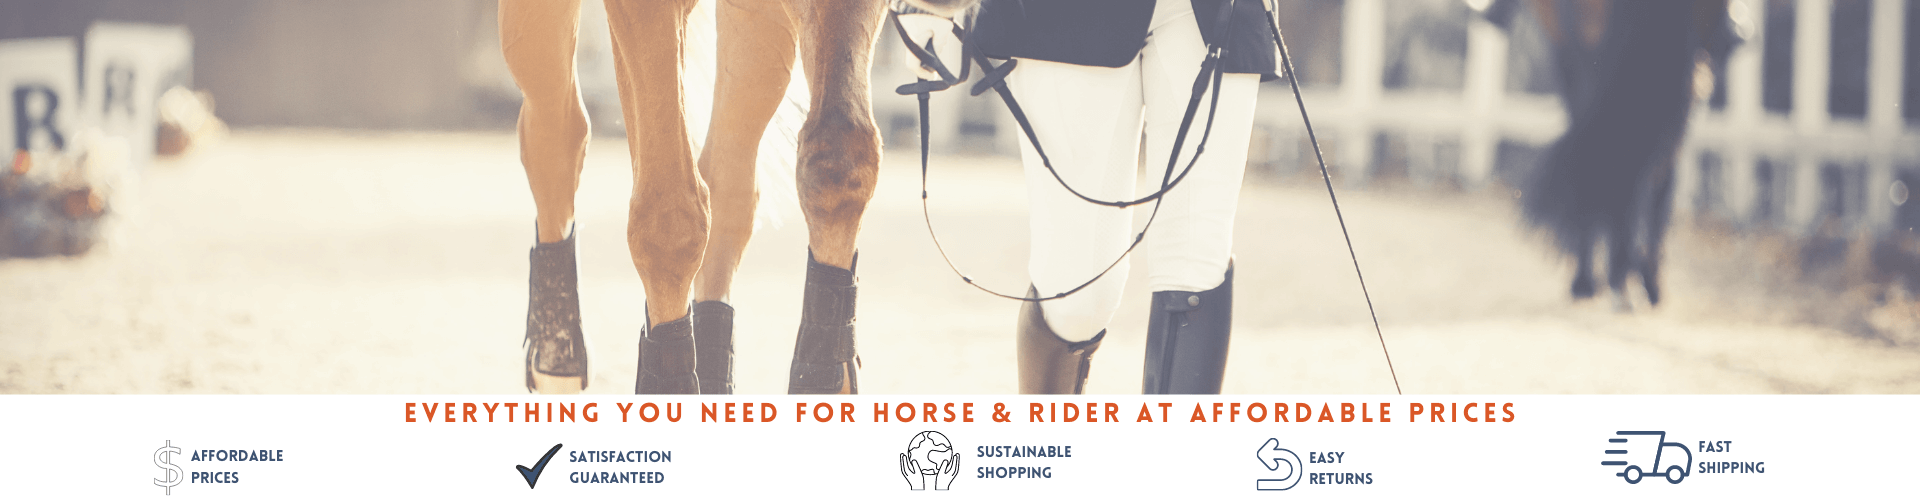 Everything You Need for Horse & Ride at Affordable Prices.  Satisfaction Guaranteed, Sustainable Shopping, Easy Returns, Fast Shipping